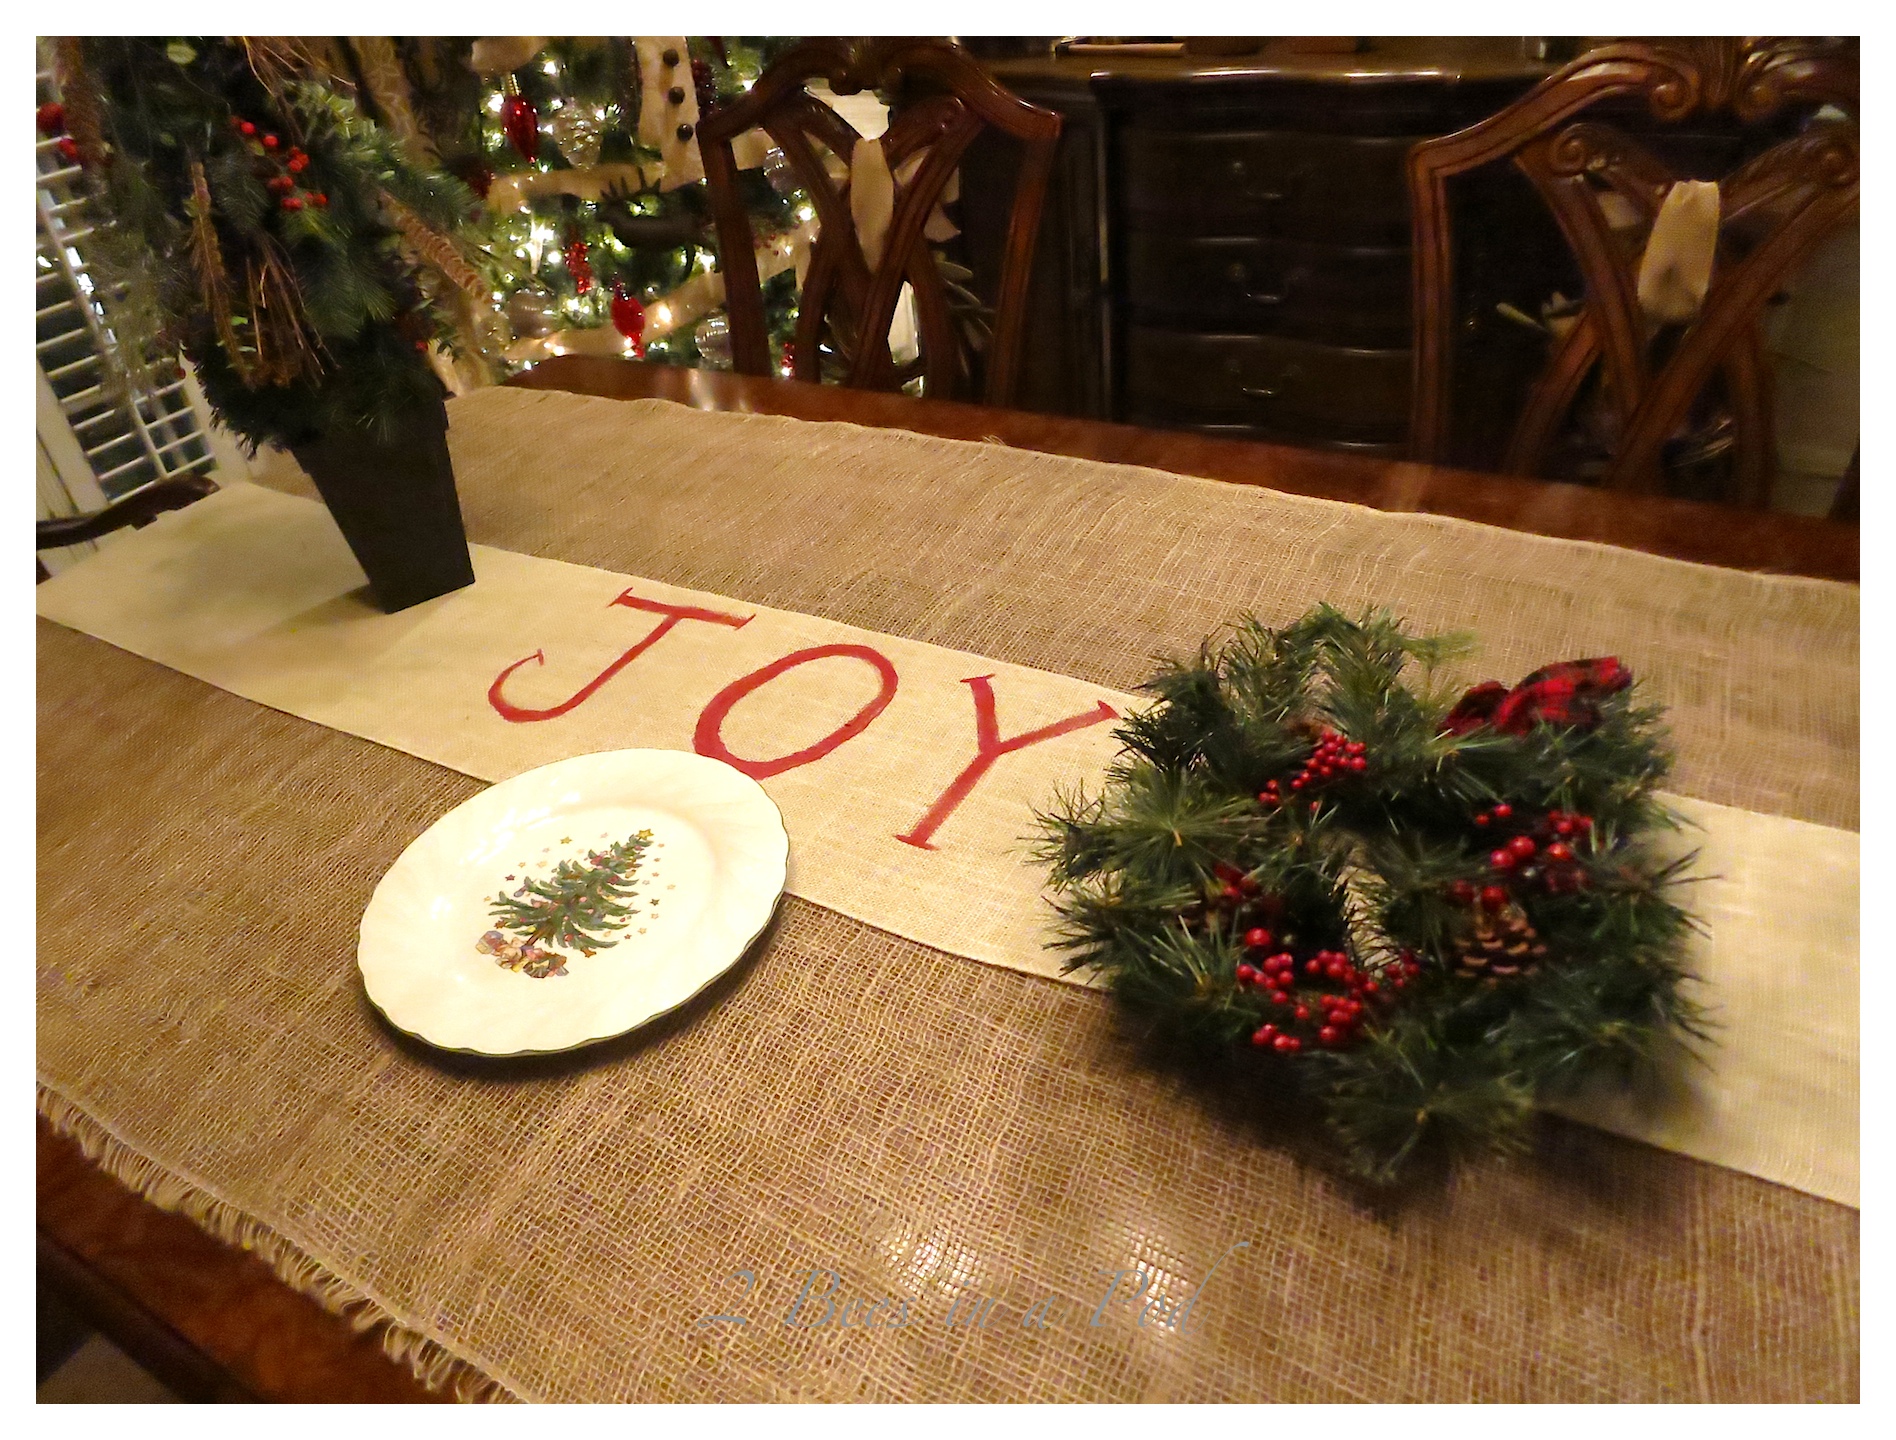 13 x 72 Inches Indoor or Outdoor Parties Tifeson Burlap Christmas Table Runner Rustic Christmas Joy Table Runner for Xmas Holiday Family Gathering Dinner Table Decorations